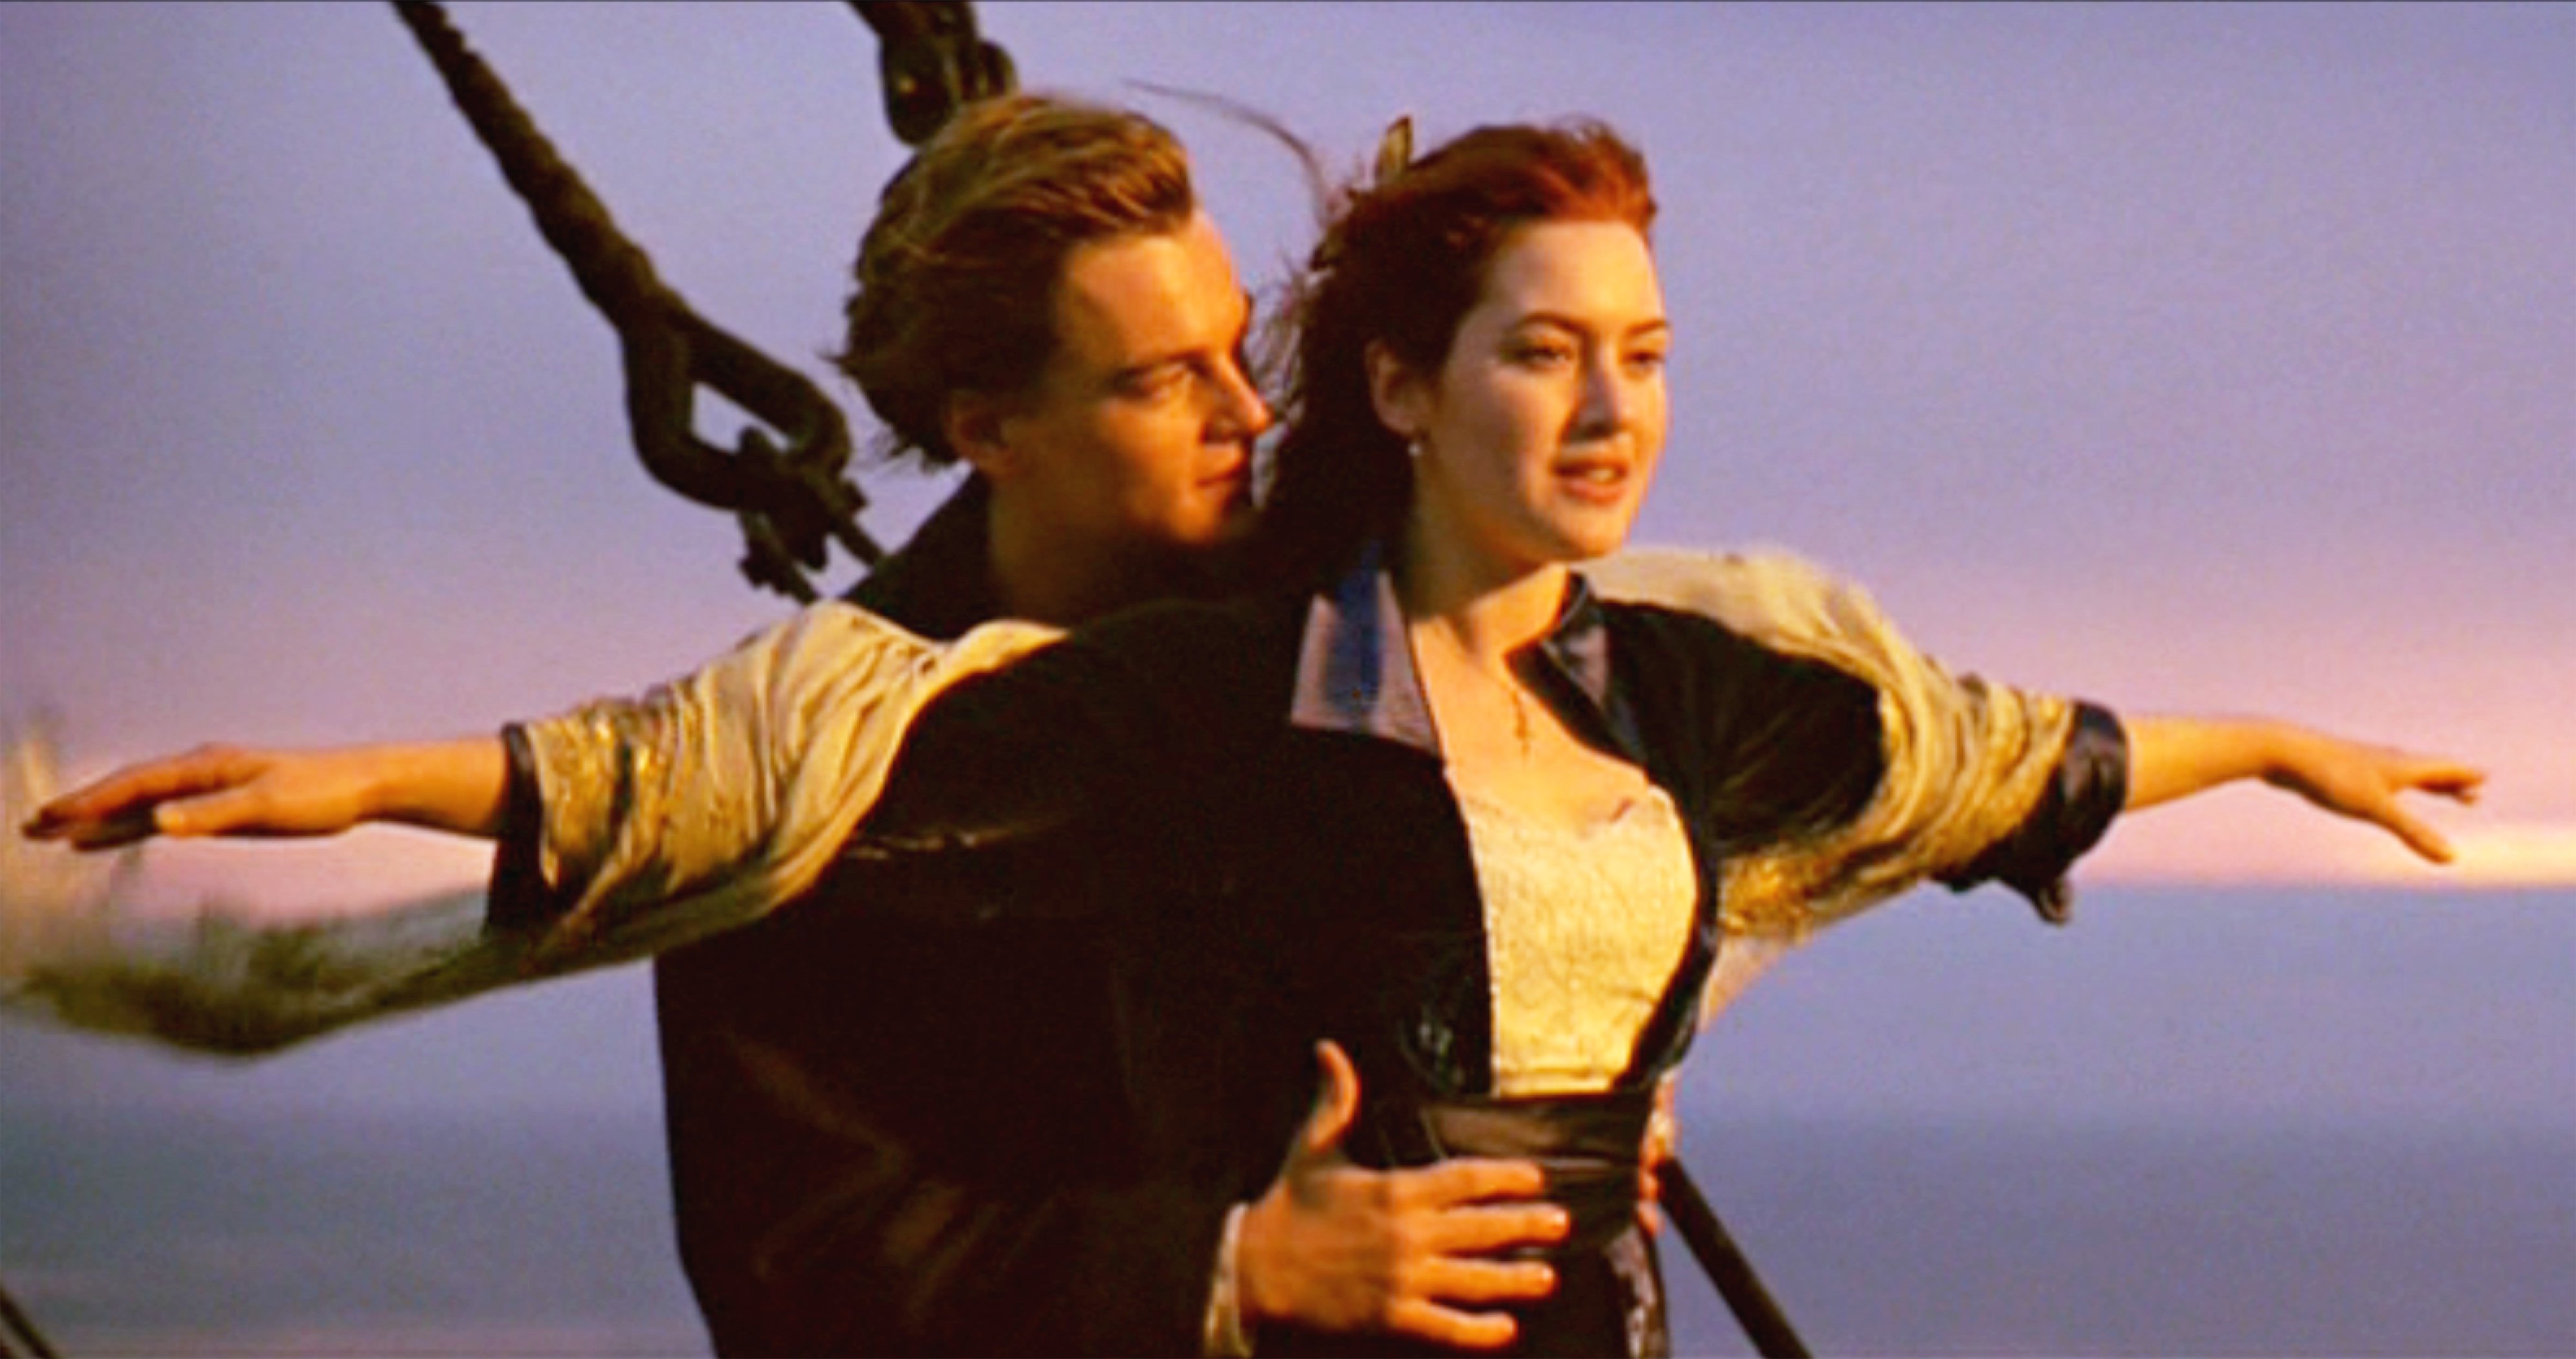 Leonardo Dicaprio and Kate Winslet as Jack Dawson and Rose DeWitt Bukater during the iconic 'I'm flying' scene from the film 'Titanic'